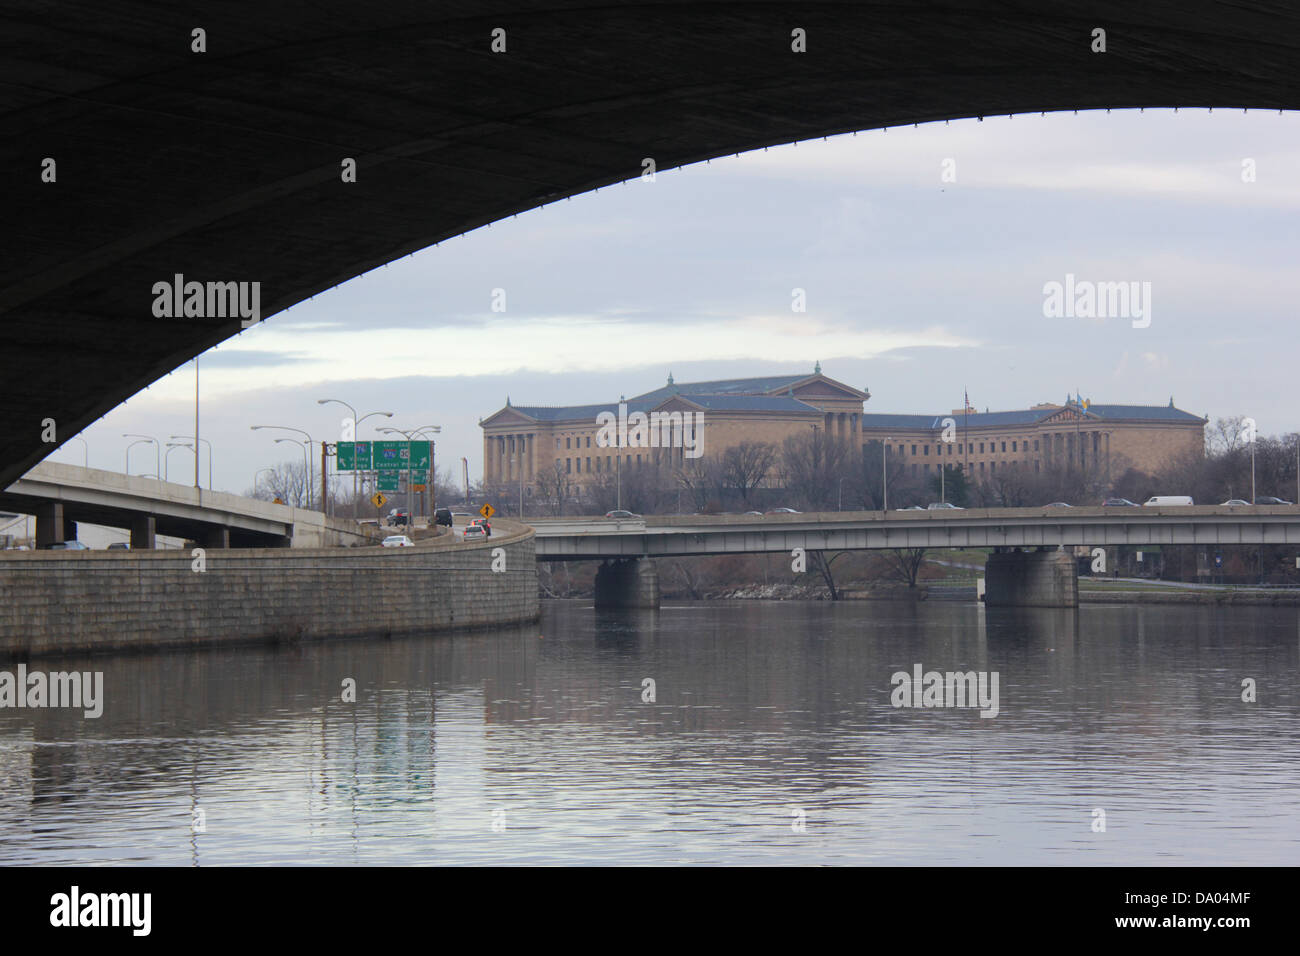 Schuylkill river seen from the eastern side banks. Philadelphia Museum of Art. Stock Photo